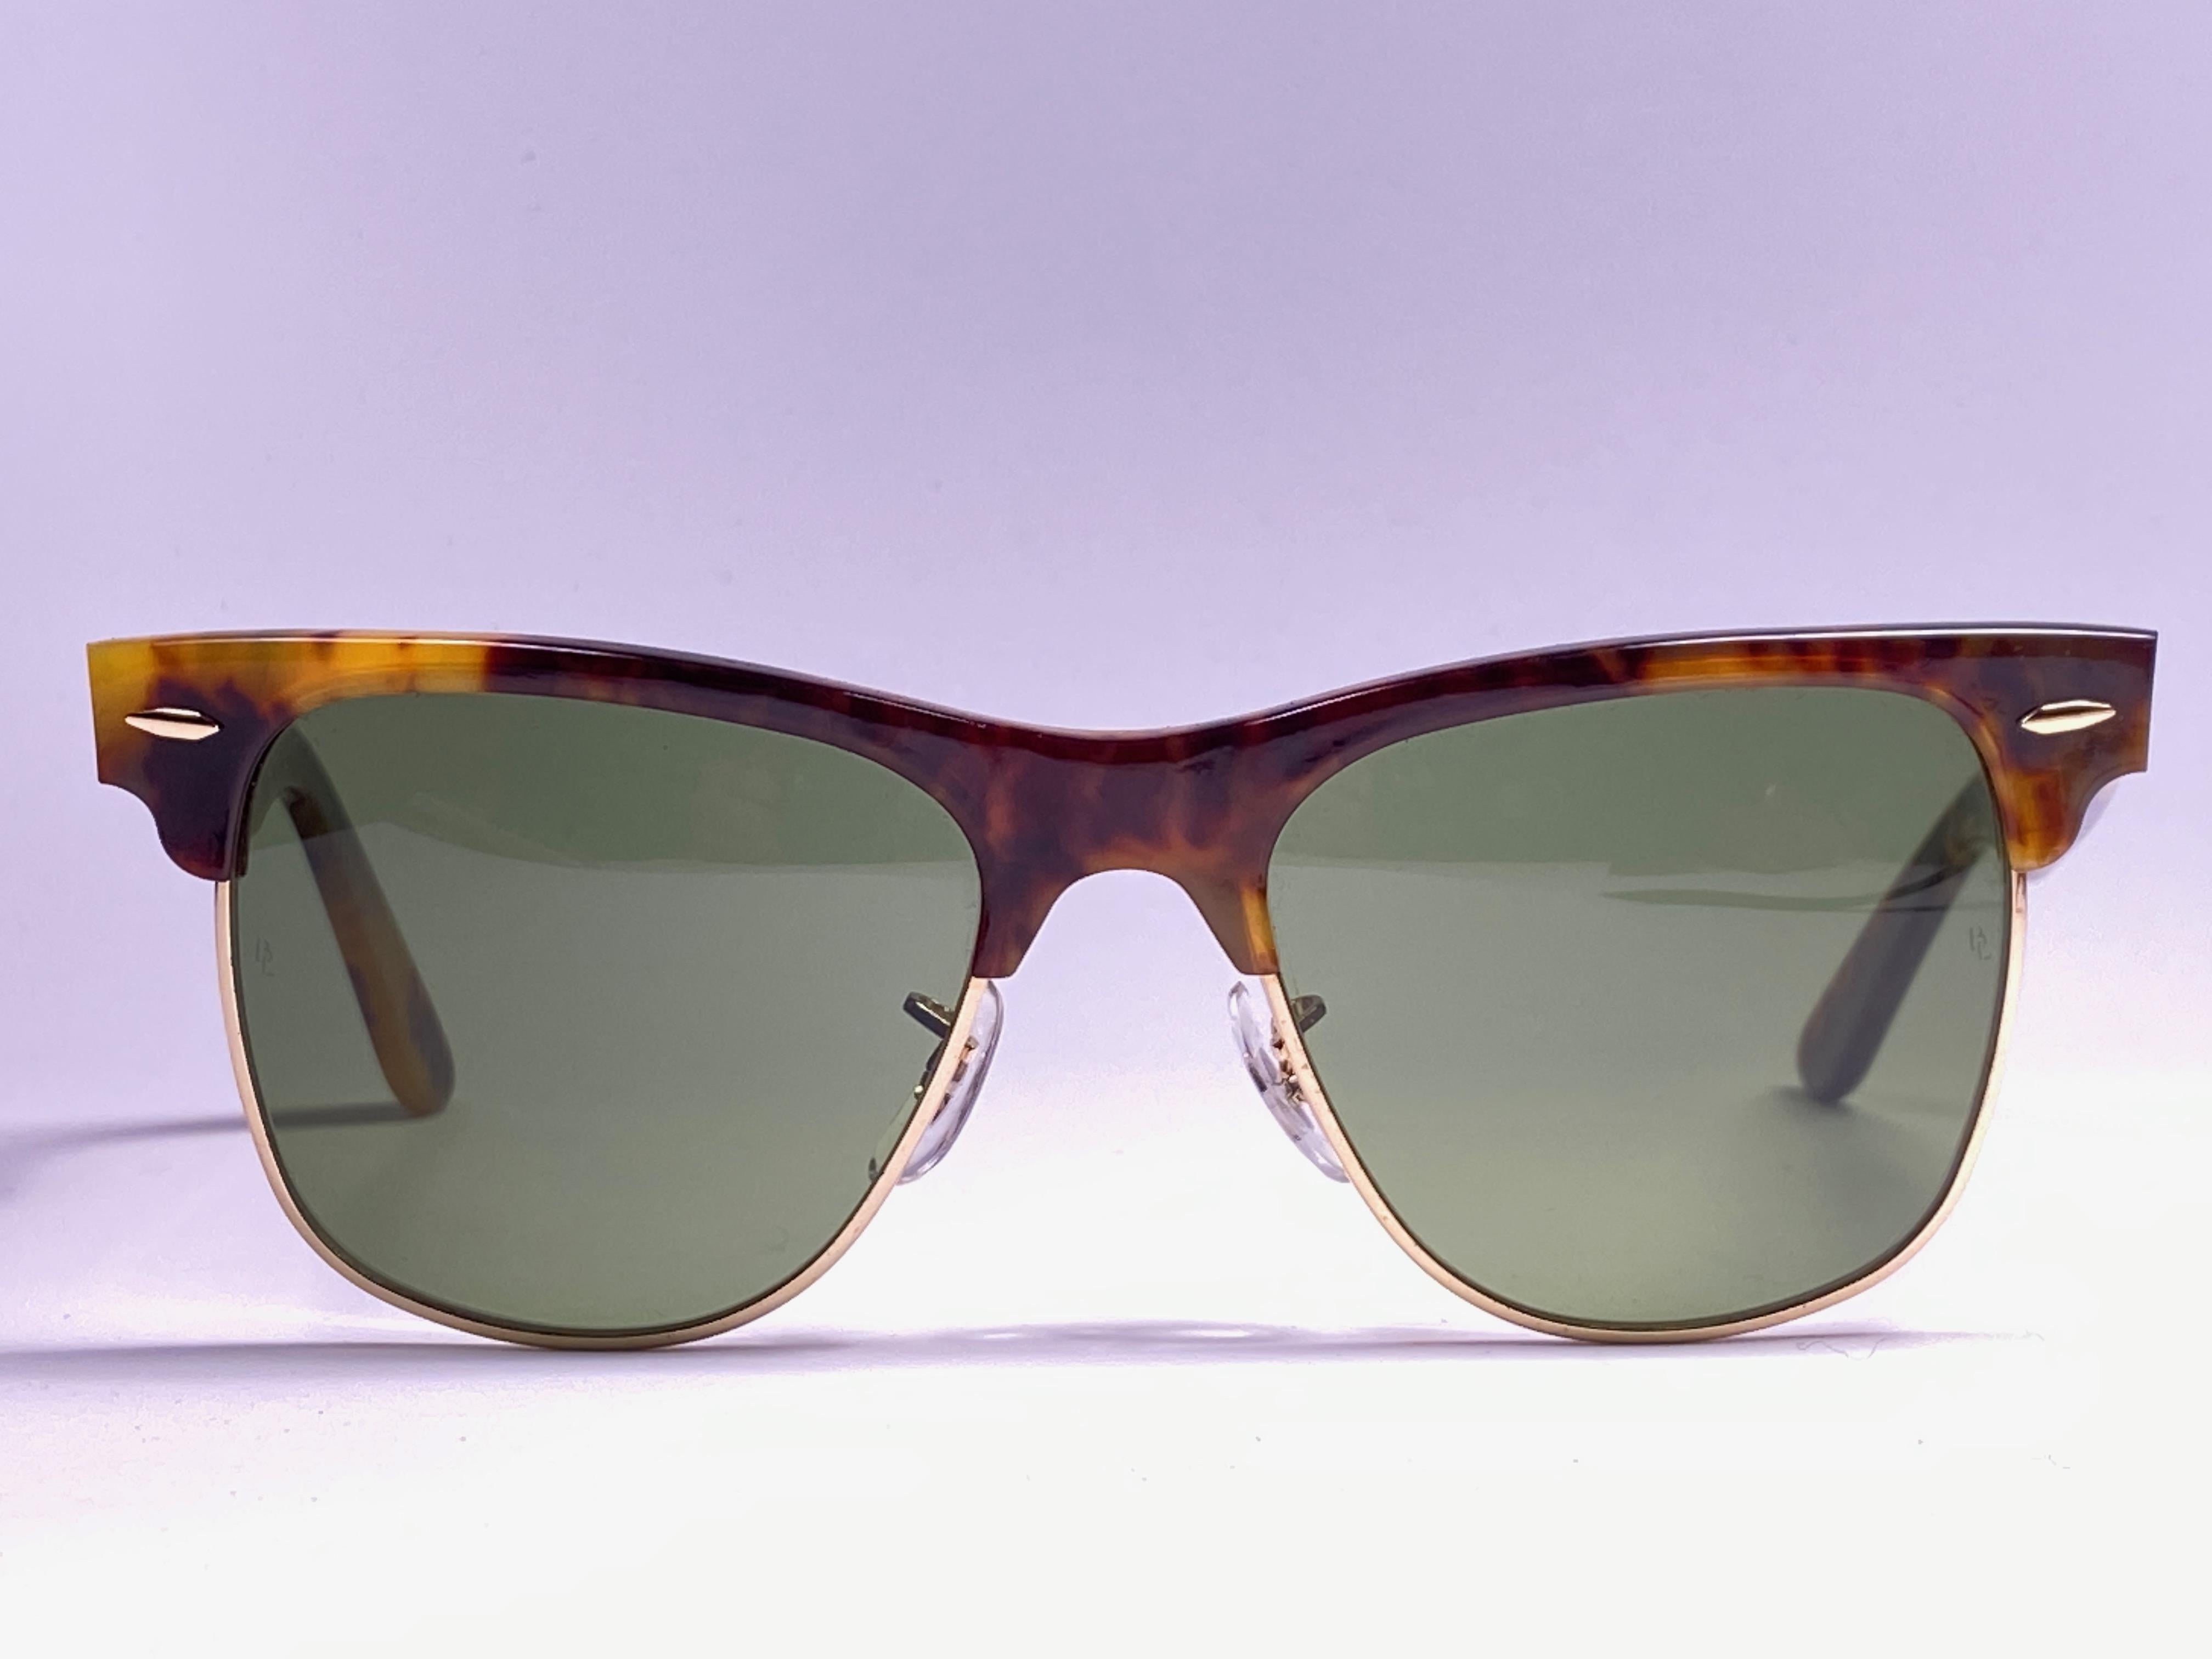 






New classic Wayfarer Max in medium tortoise. 
B&L etched in both RB3 green lenses. 
Please notice that this item is nearly 40 years old and show some storage wear.  

Made in USA.